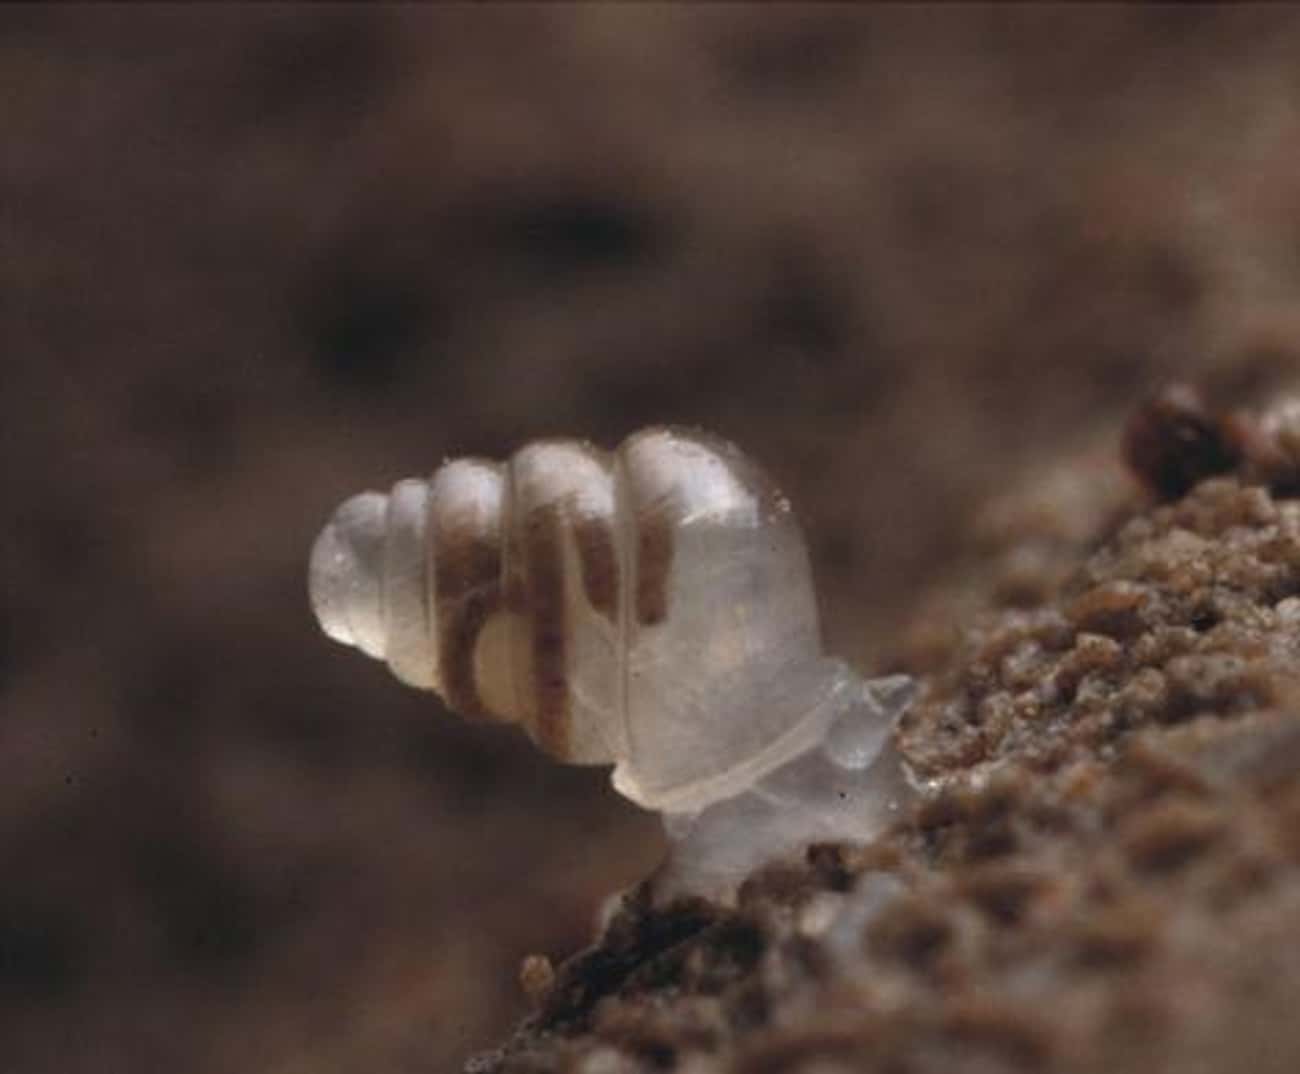 This Transparent Snail Has A House That's All Window